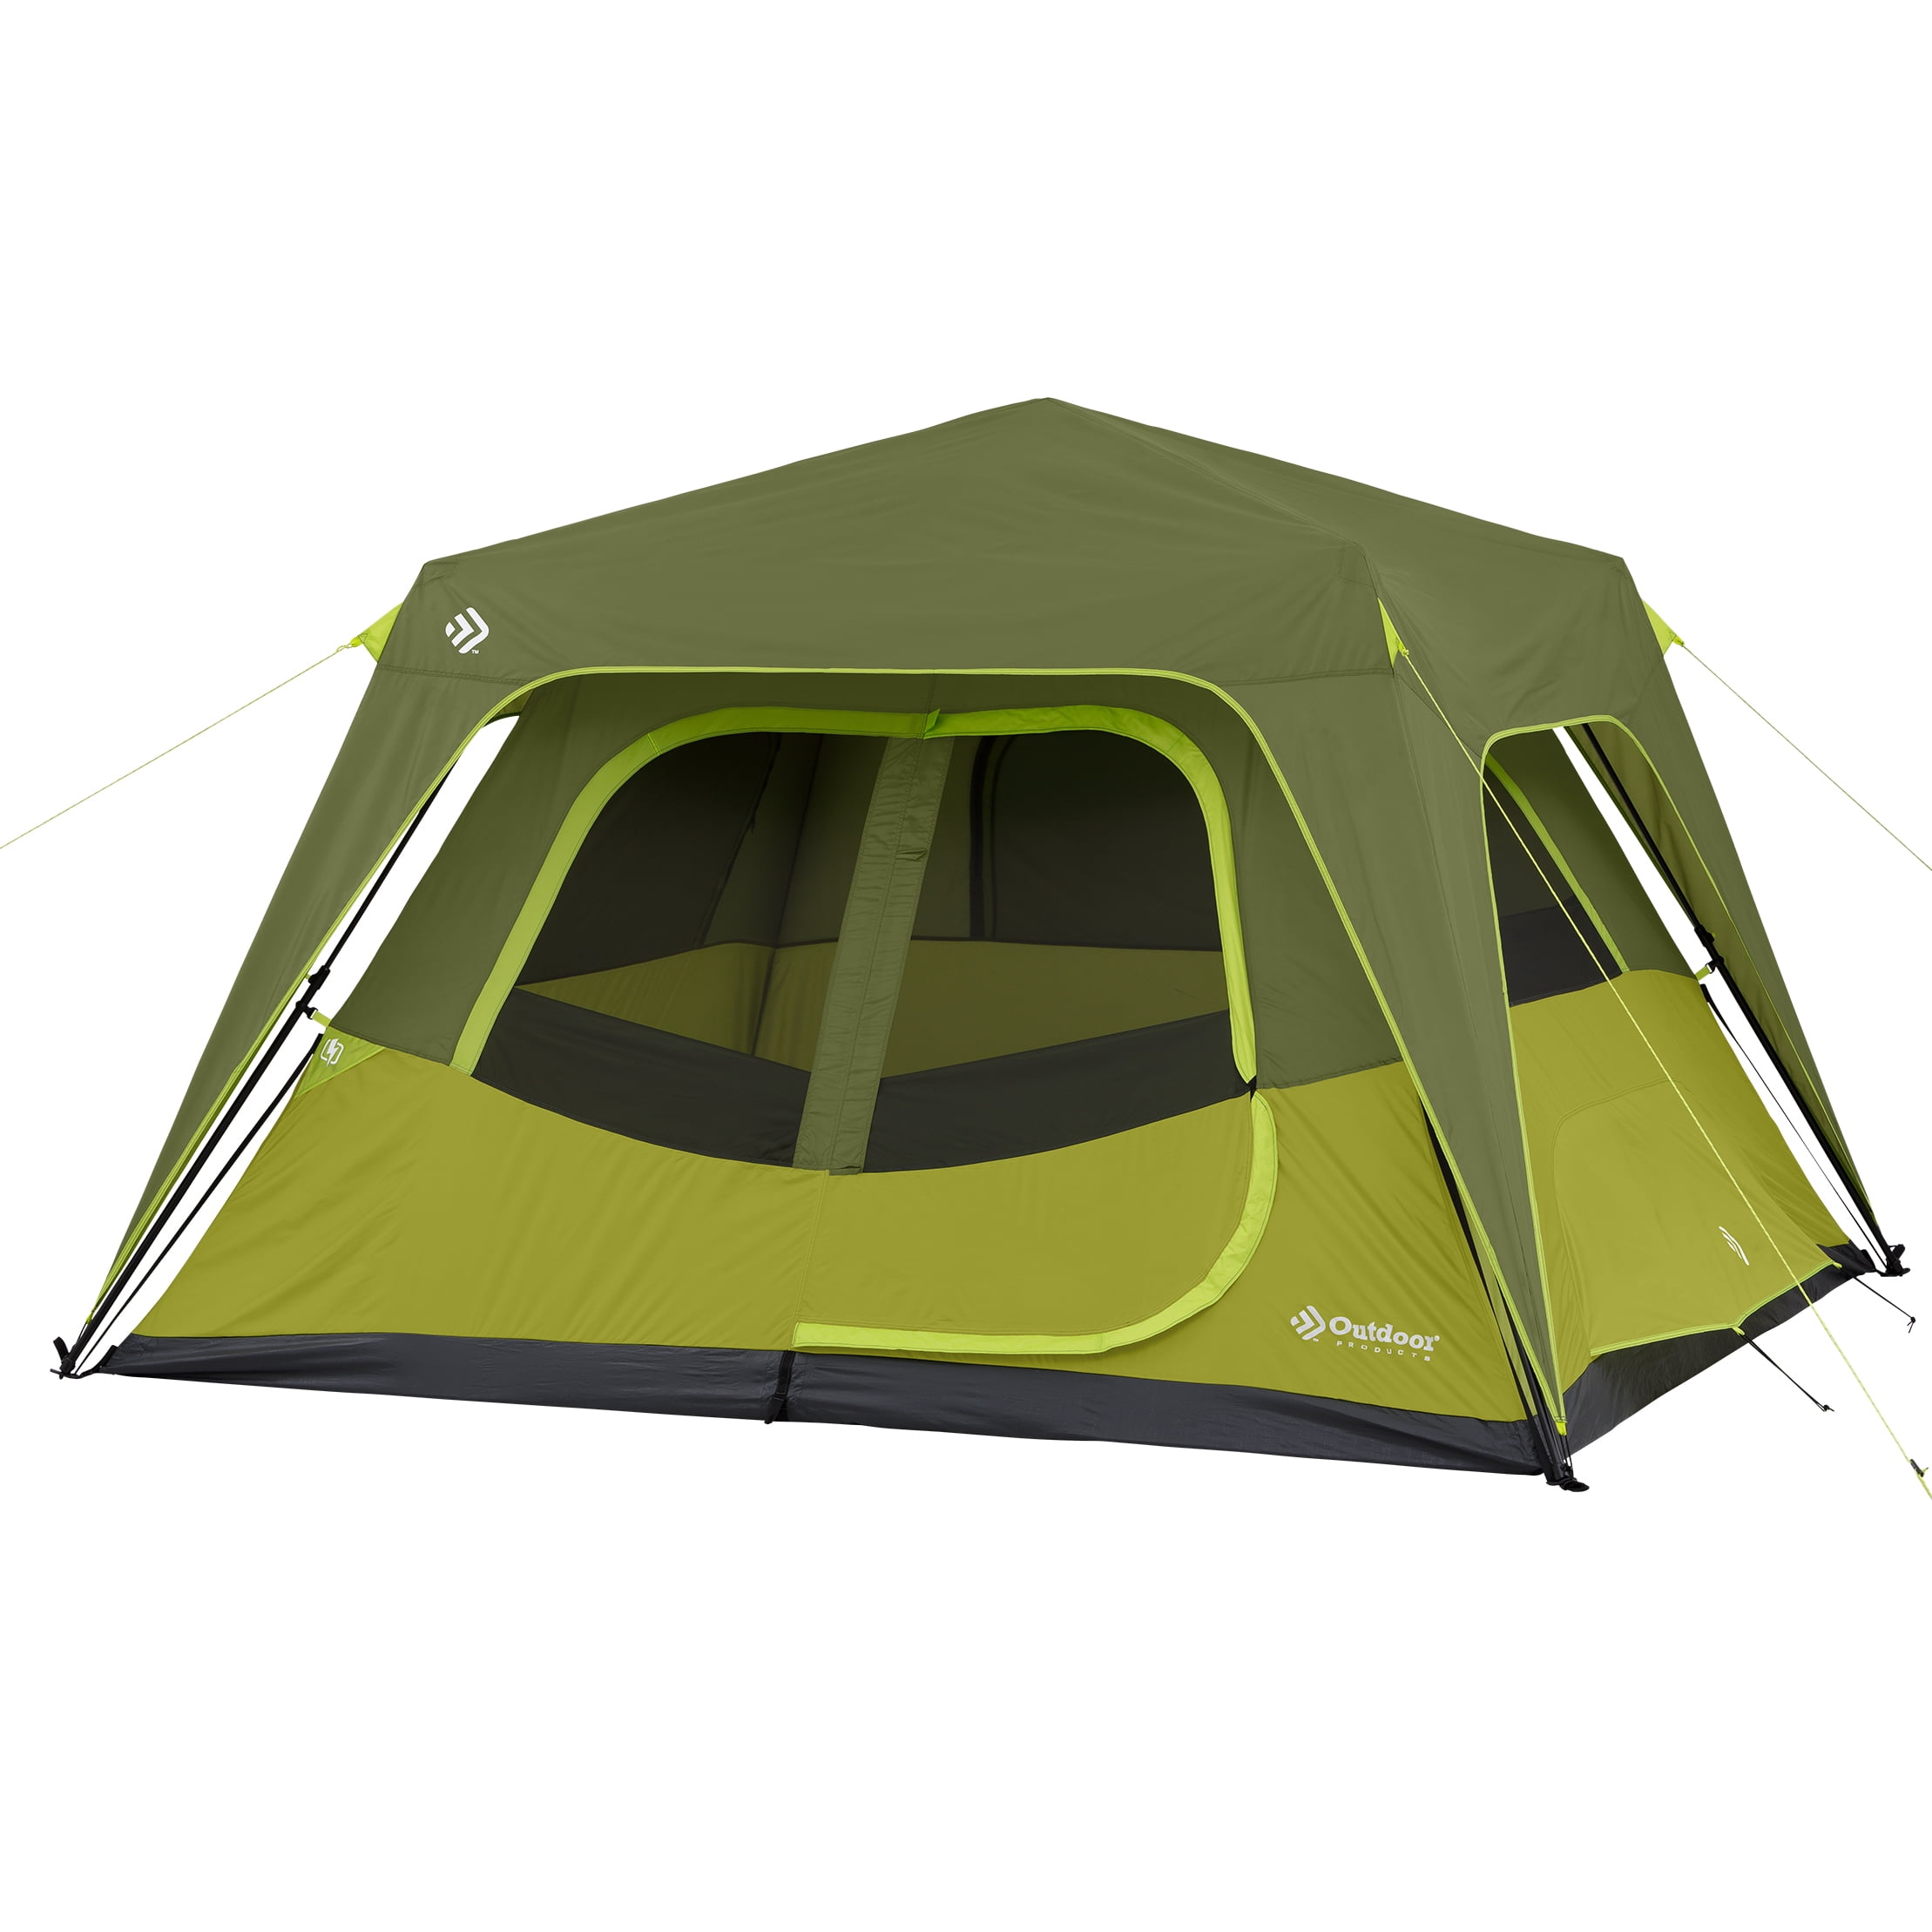 Camping-CLEARANCE-RRP £399.99 KELTY COMO 6 FAMILY TENT Sturdy 6 Man 3 Season 